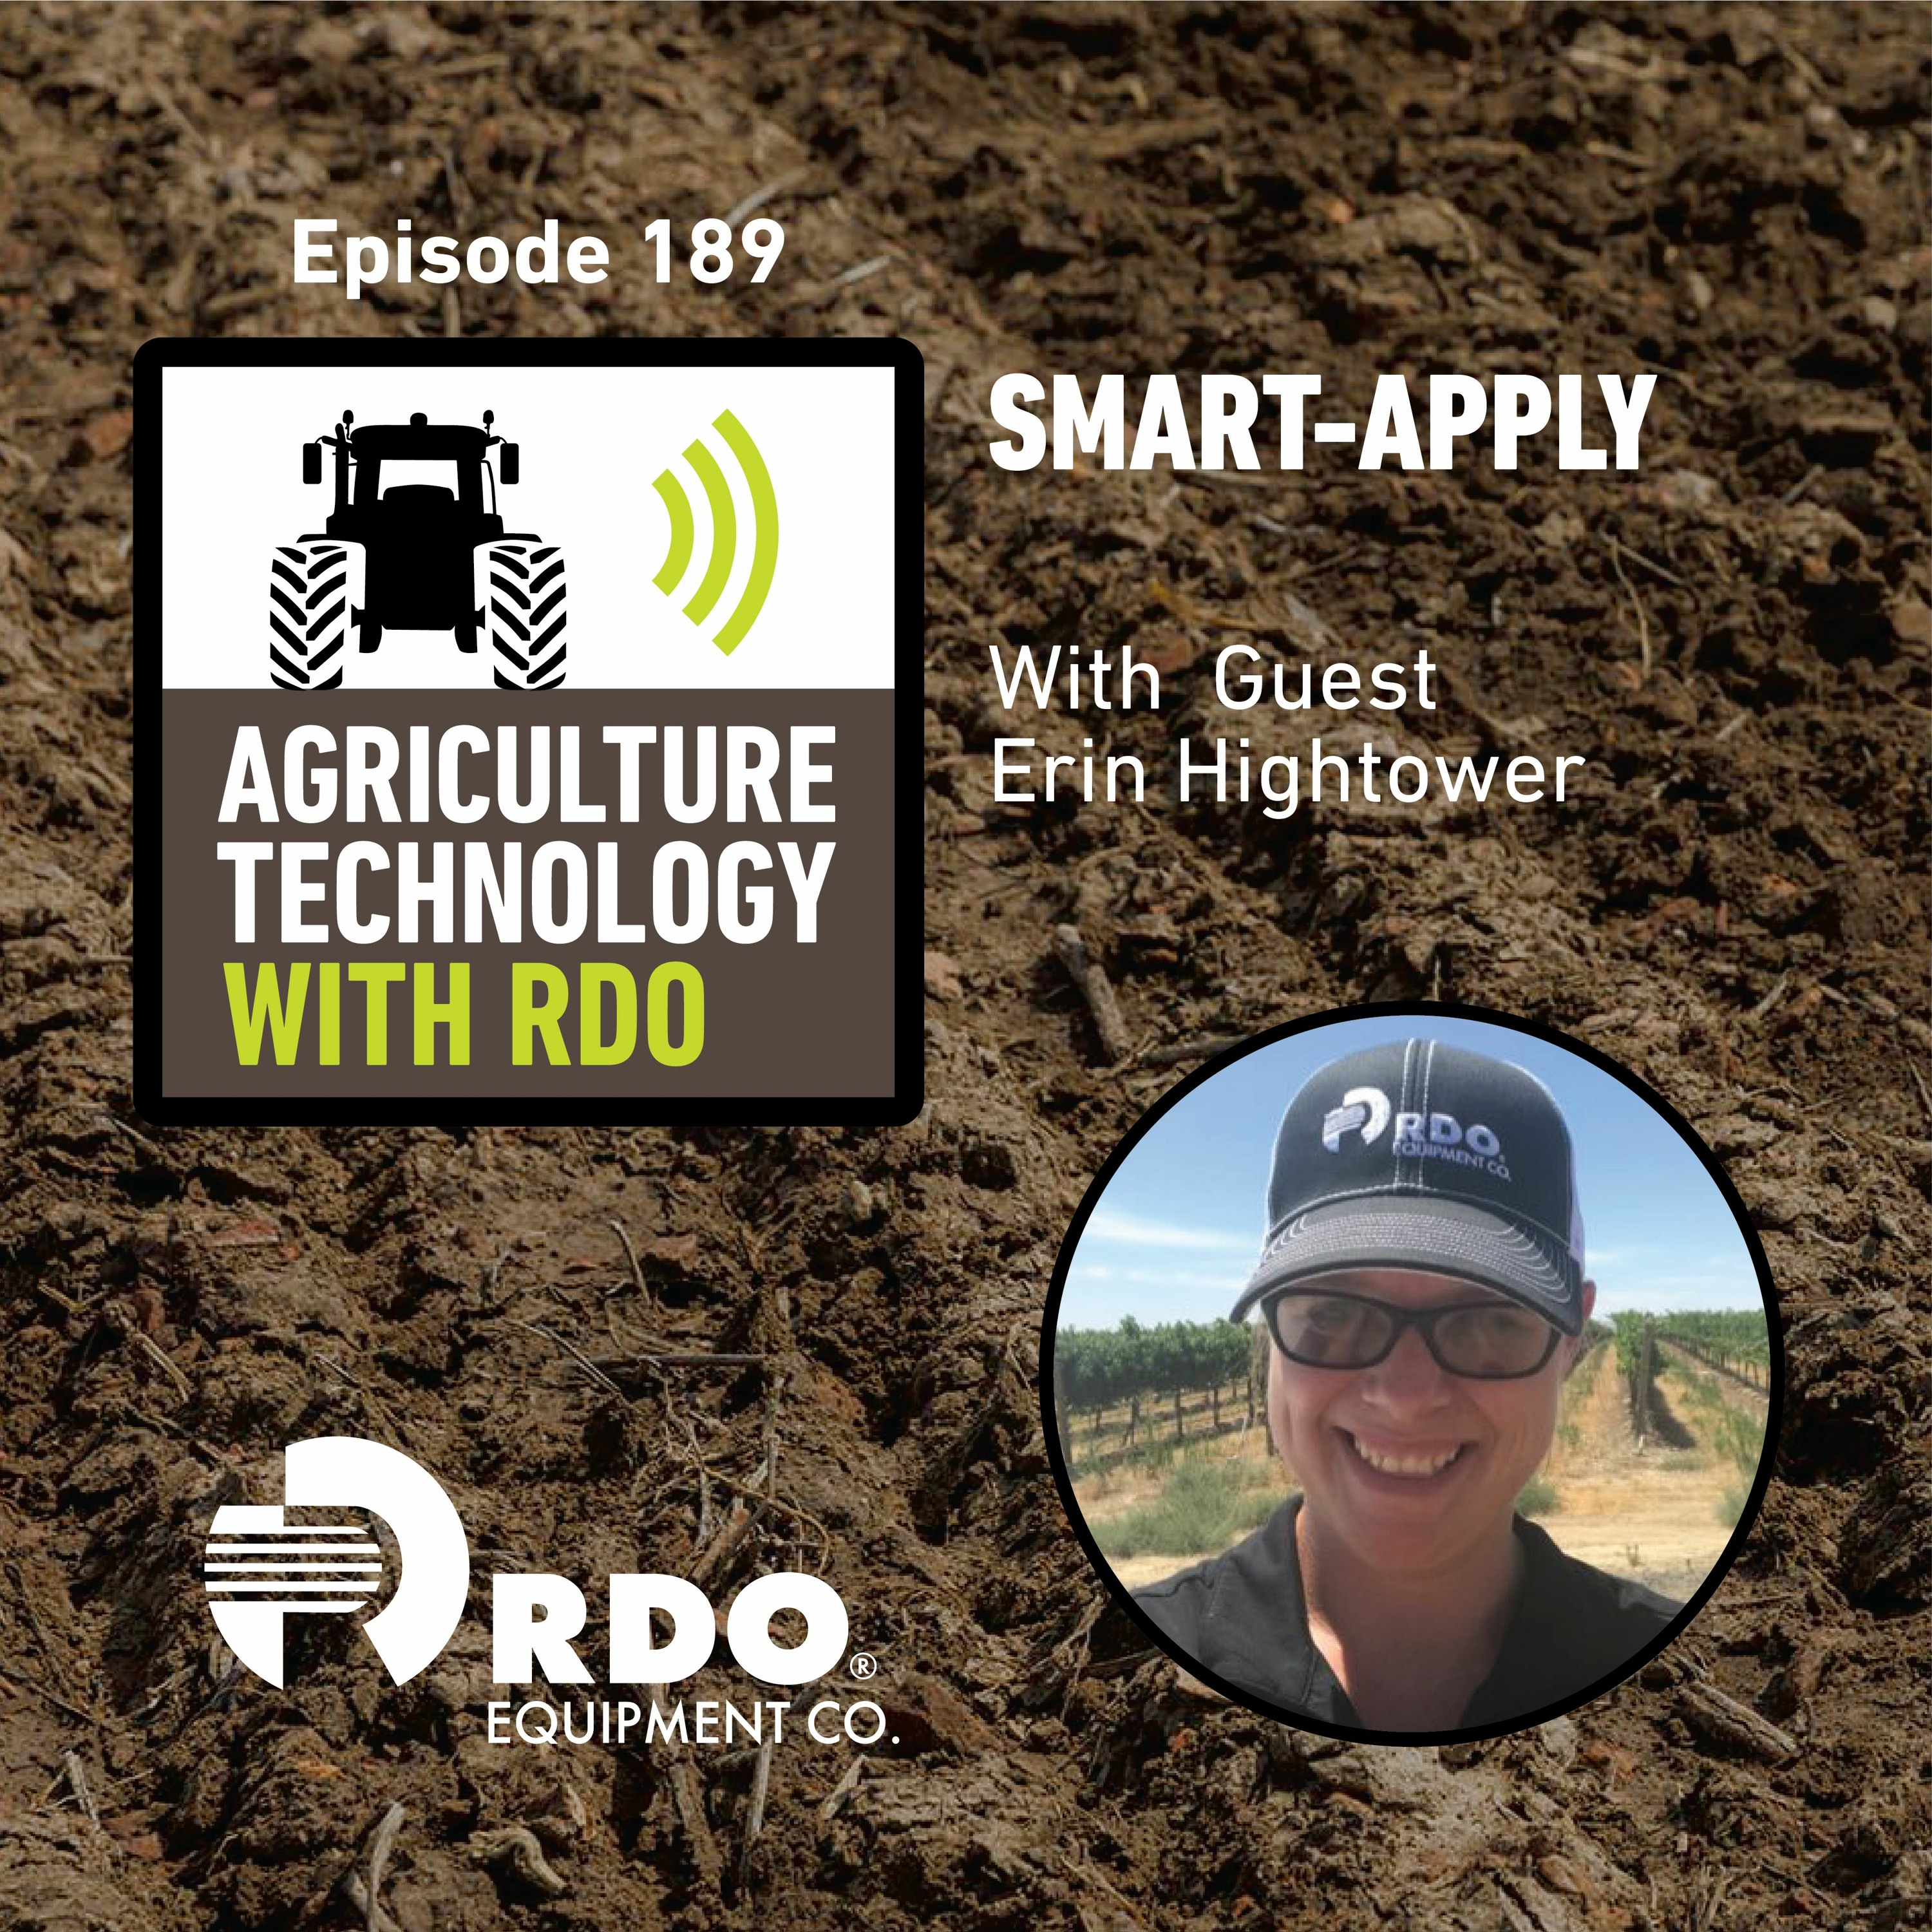 Ep. 189 - Smart Apply with Guest Erin Hightower